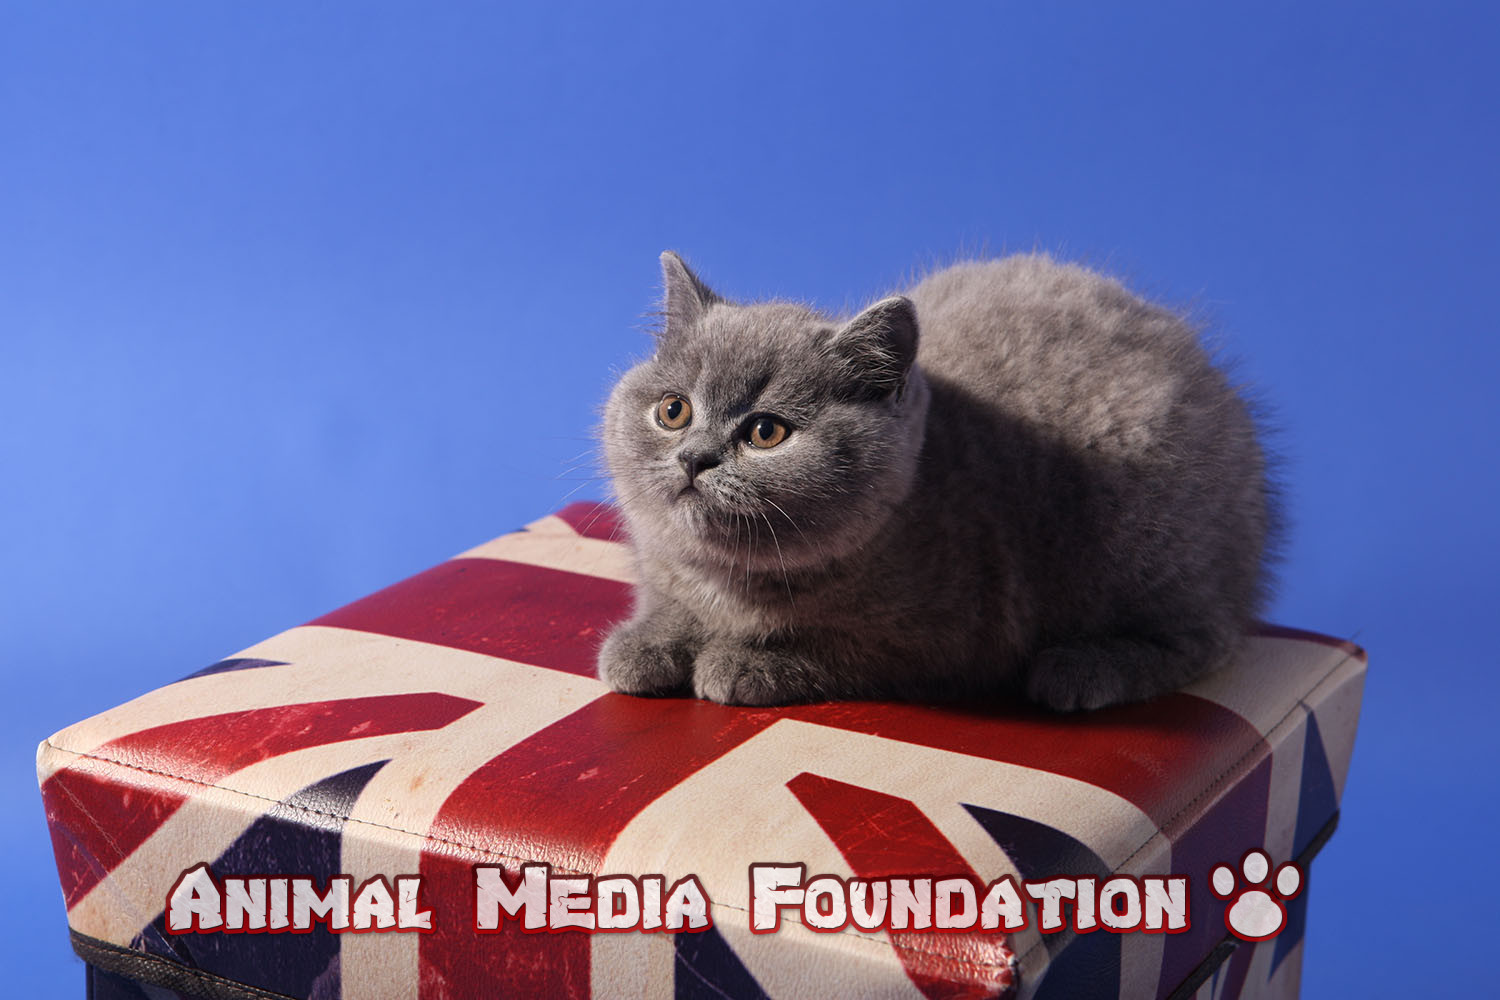 What is British Shorthair and exotic shorthair Max looks like?